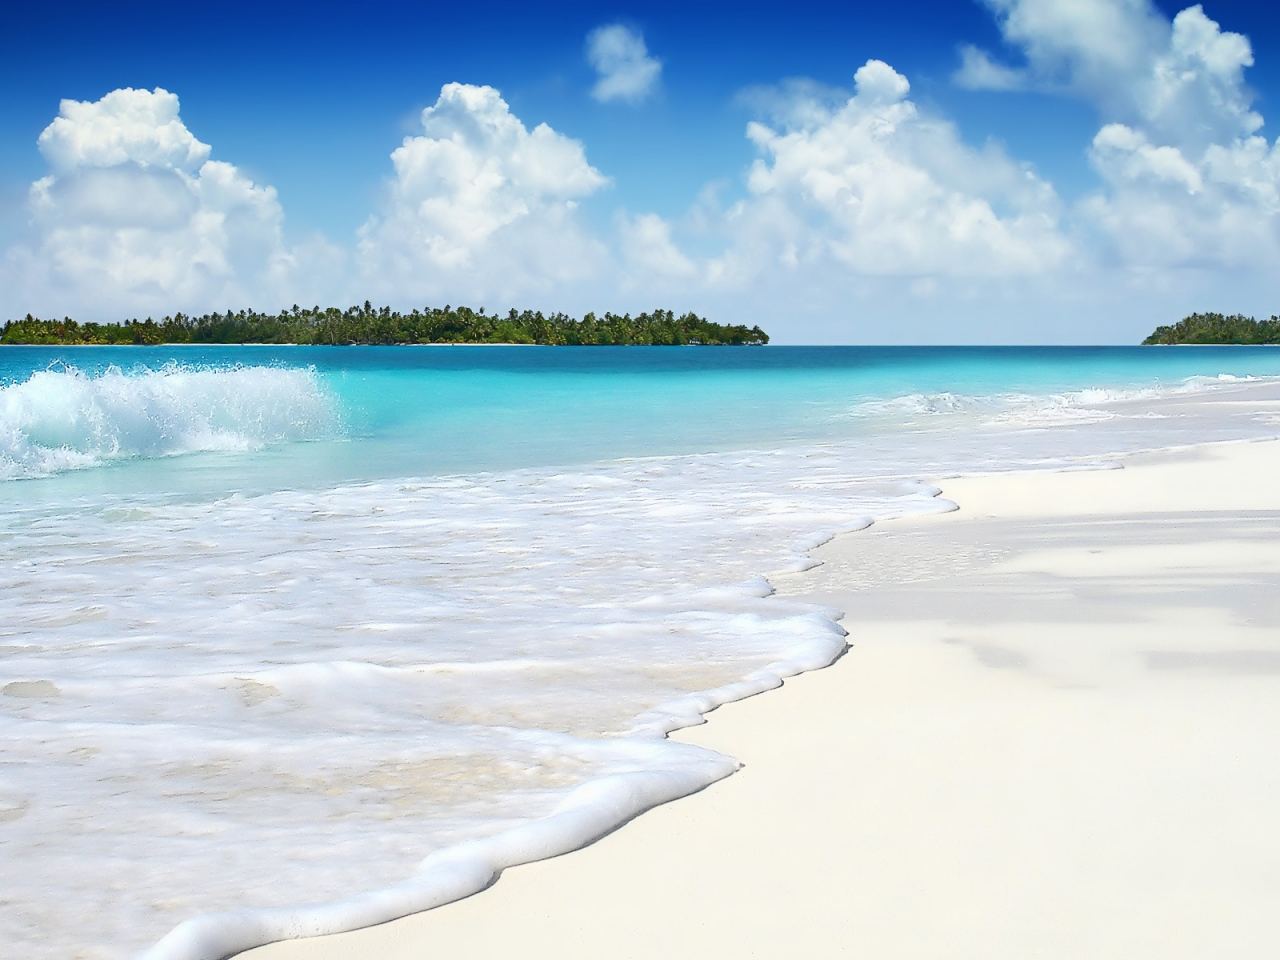 The Beautiful Summer Island for 1280 x 960 resolution